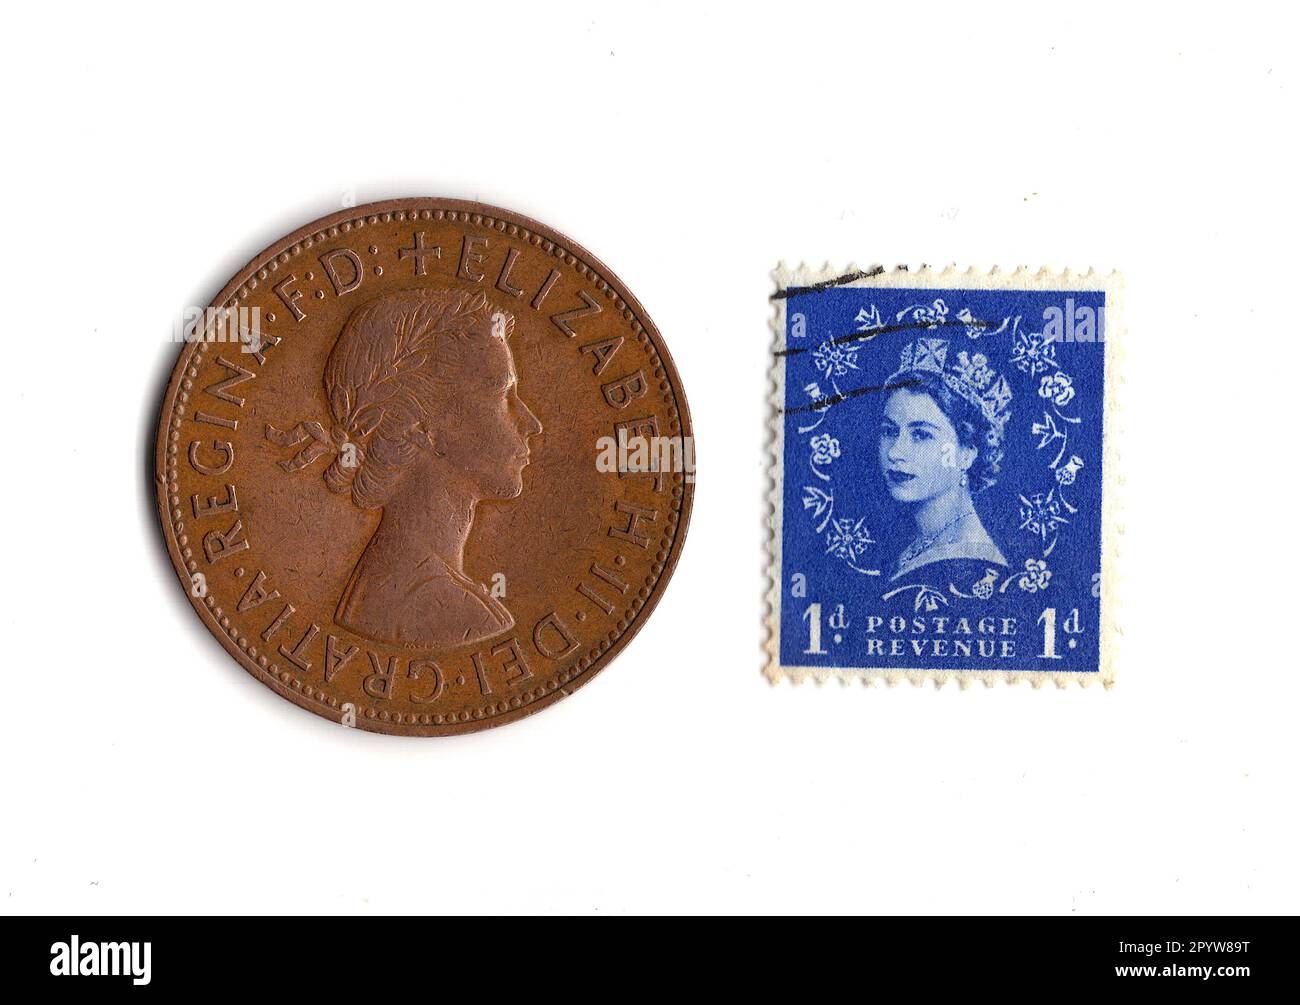 Penny coin and stamp from the reign of Queen Elizabeth II isolated on a white background. Stock Photo